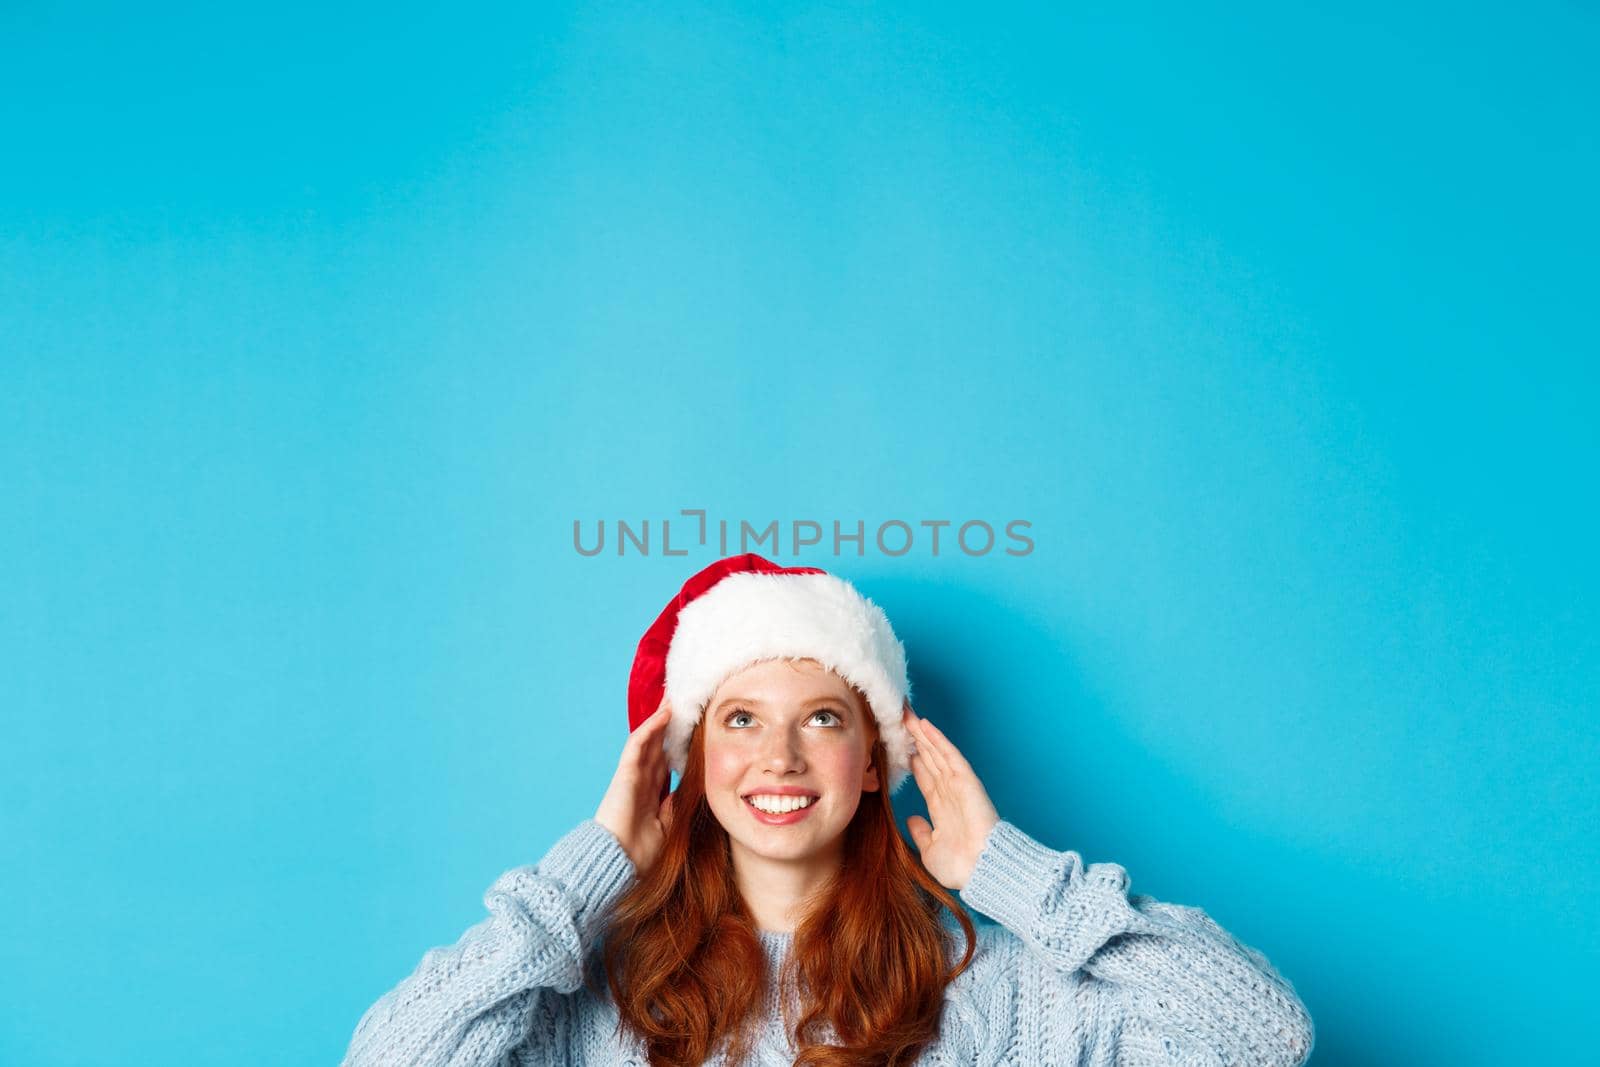 Winter holidays and Christmas eve concept. Head of cute redhead girl in santa hat, appear from bottom and looking up at copy space, staring logo, standing over blue background.